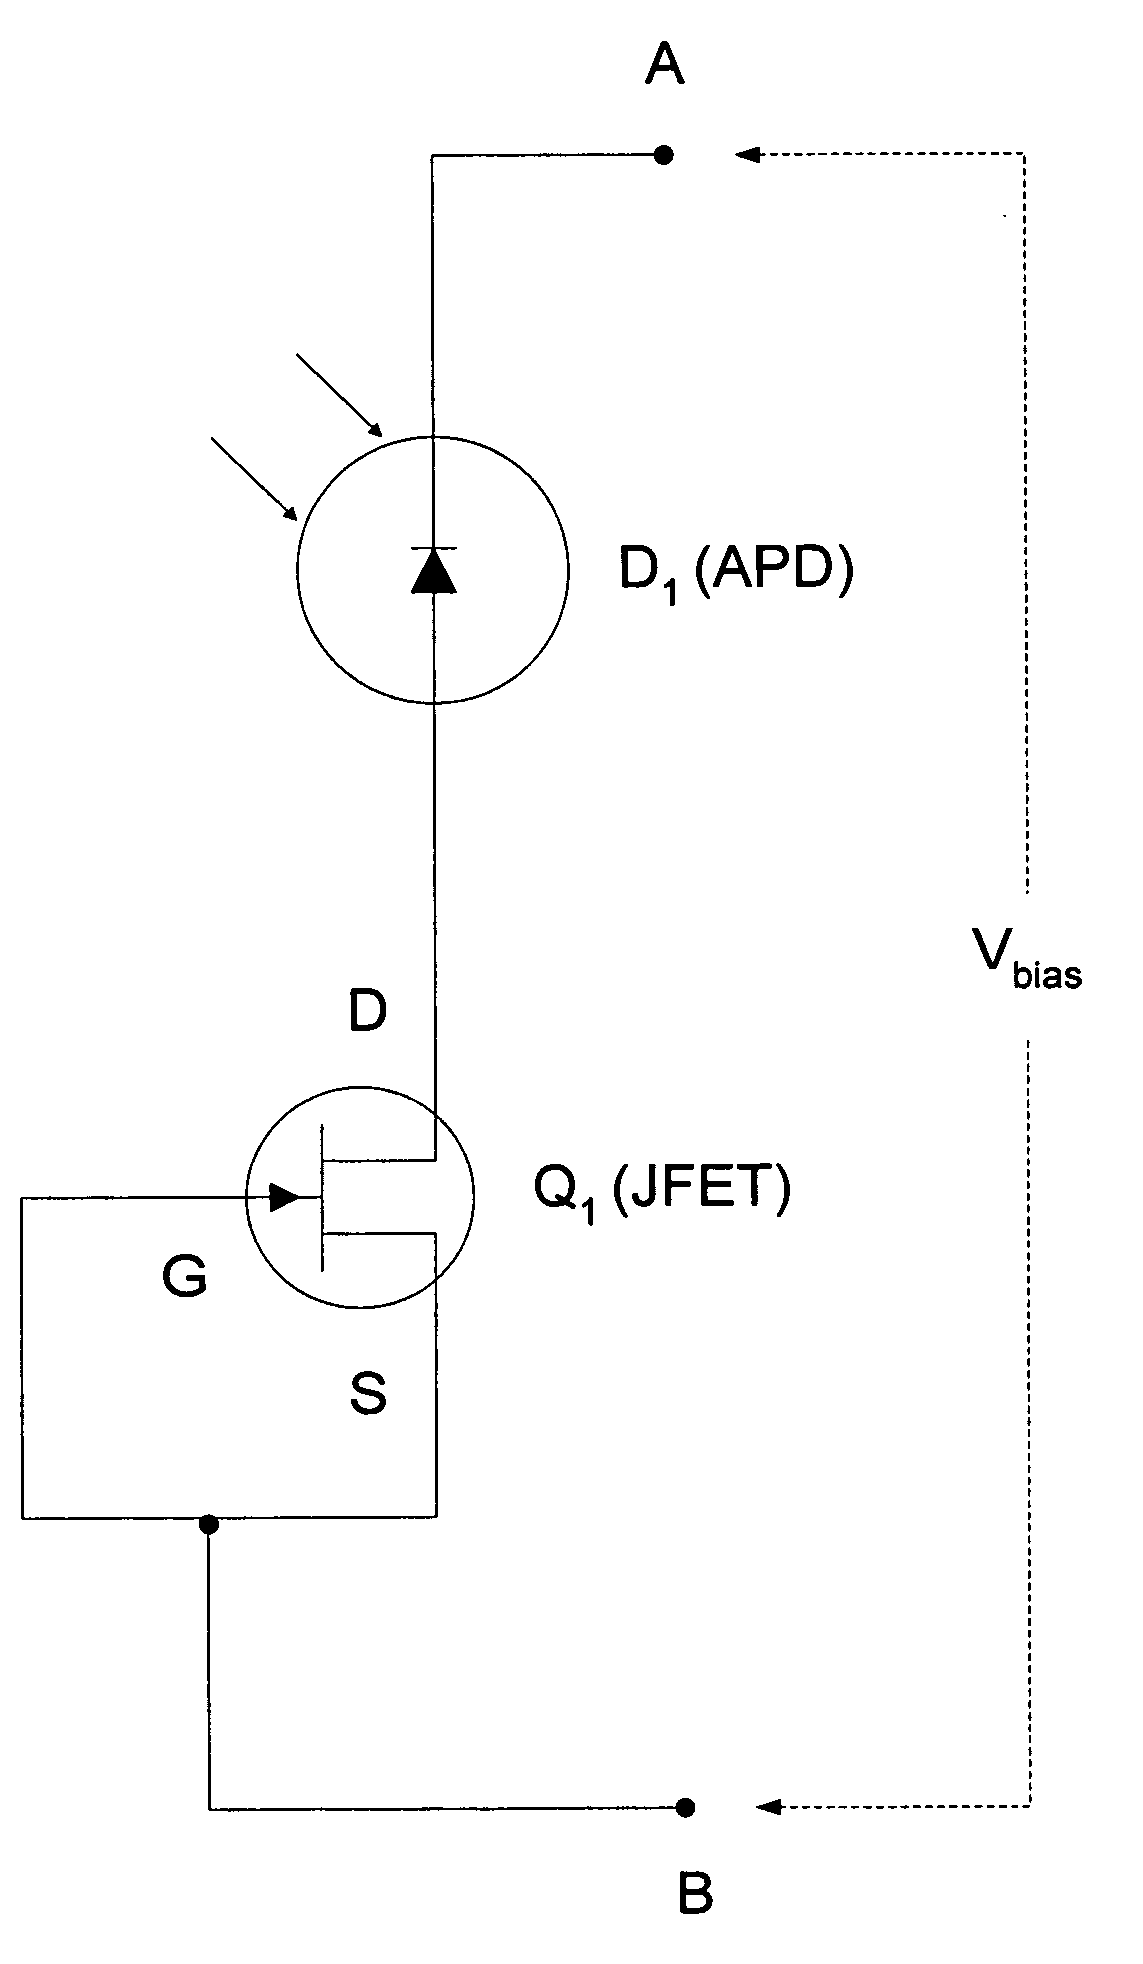 Method and apparatus for providing non-linear, passive quenching of avalanche currents in Geiger-mode avalanche photodiodes